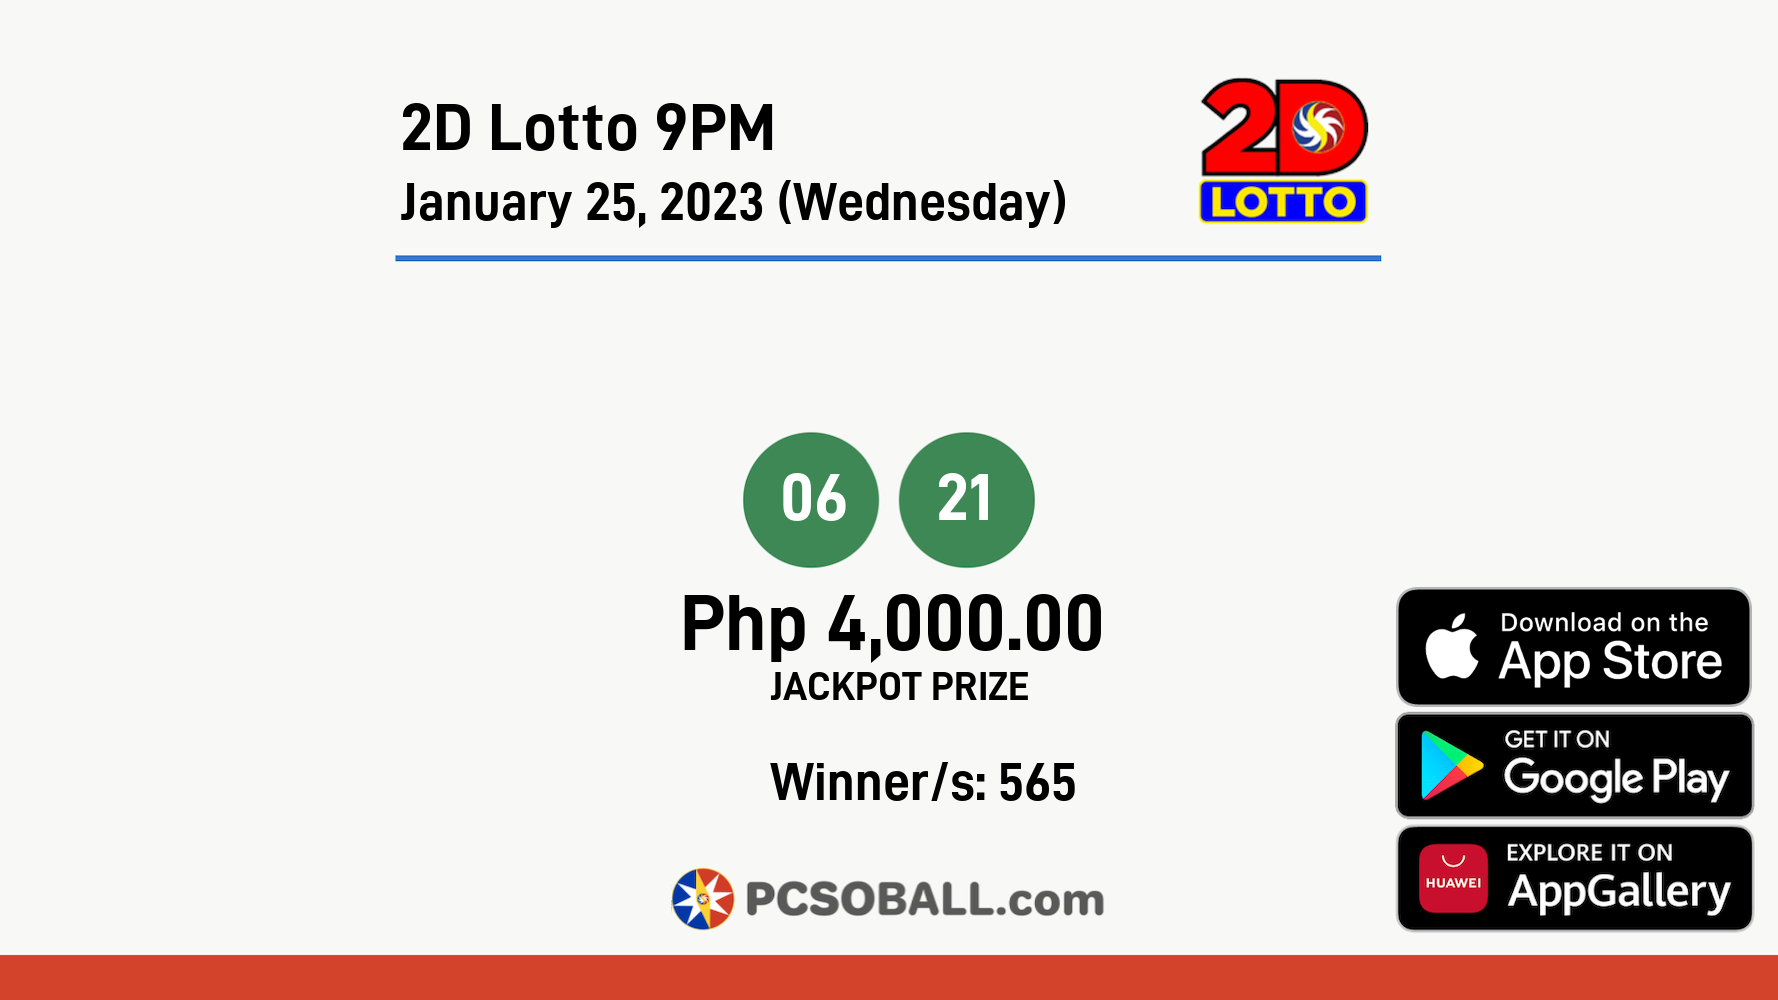 2D Lotto 9PM January 25, 2023 (Wednesday) Result